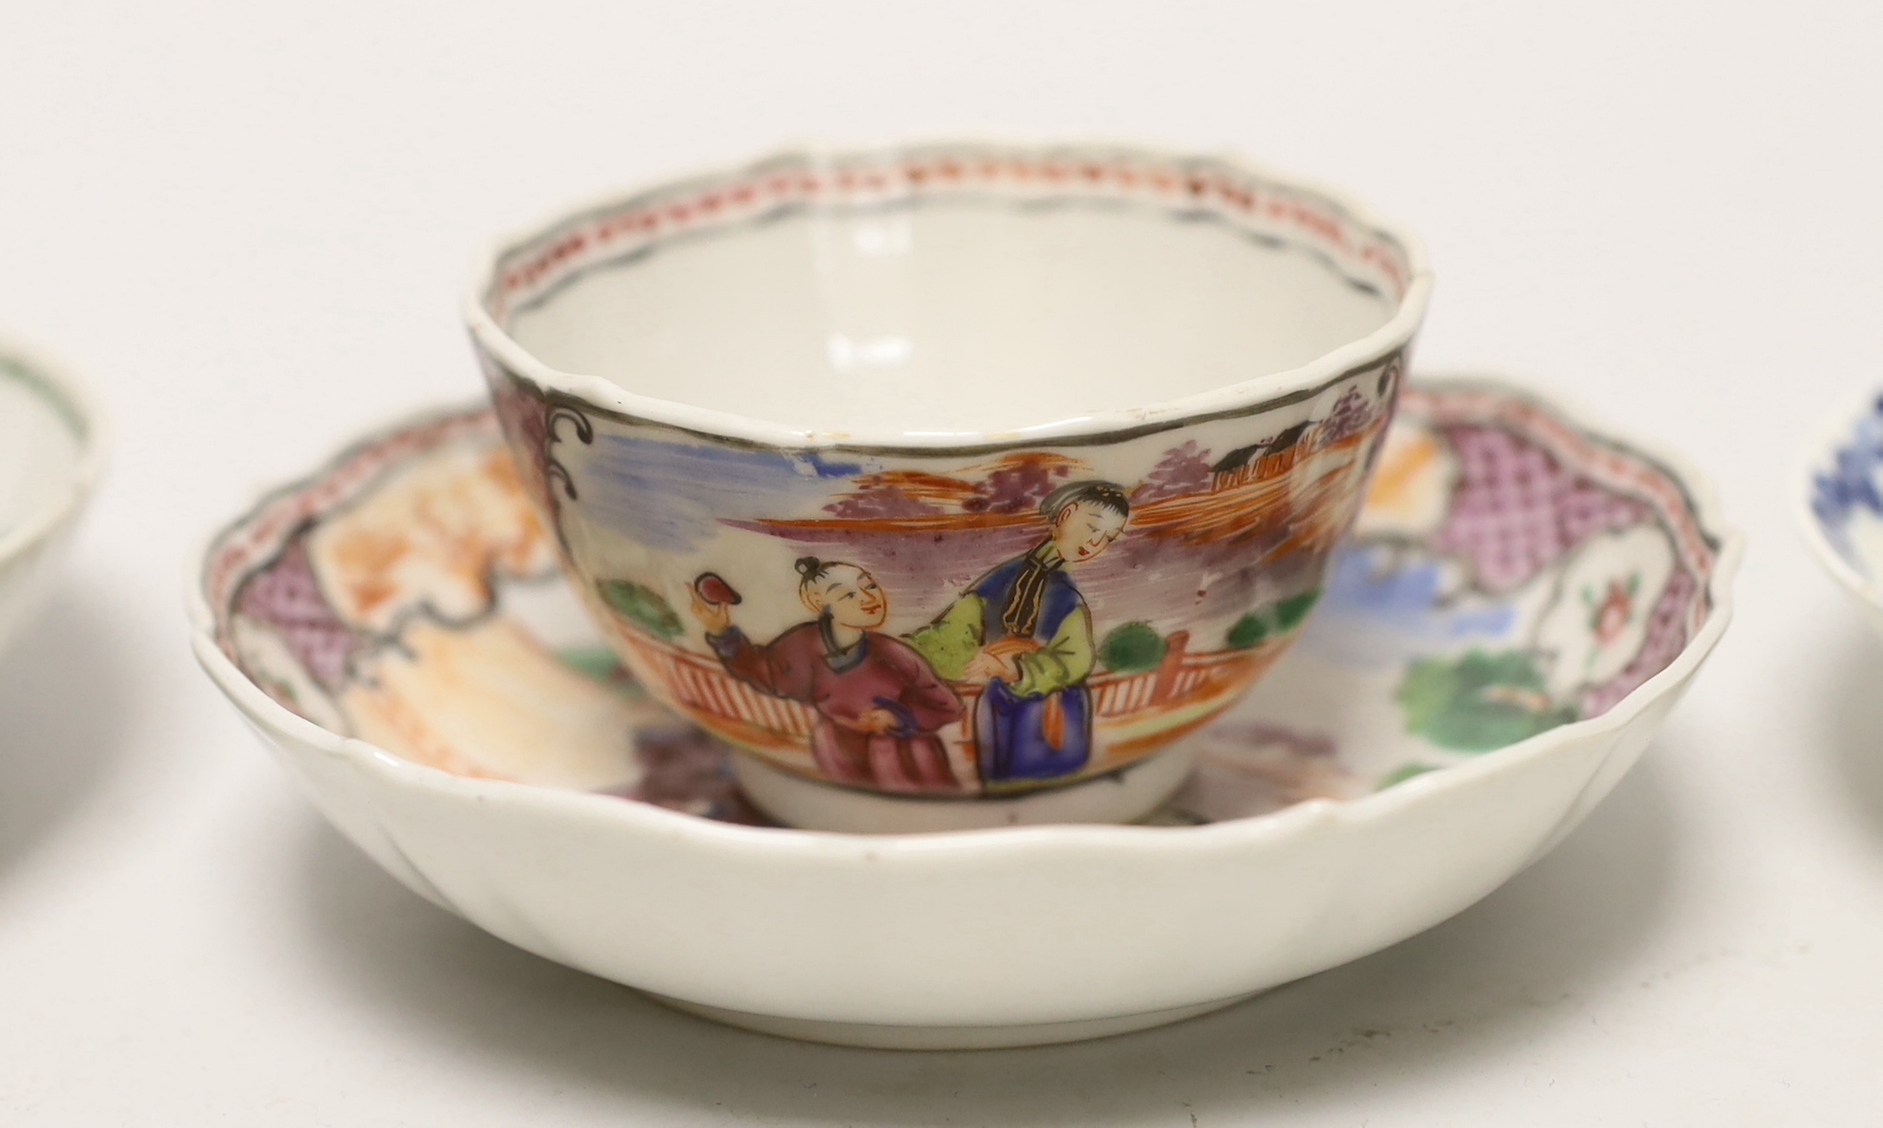 Three 18th century Chinese famille rose tea bowls and matching saucers, a Caughley teabowl and saucer and a single tea bowl and smaller tea bowl